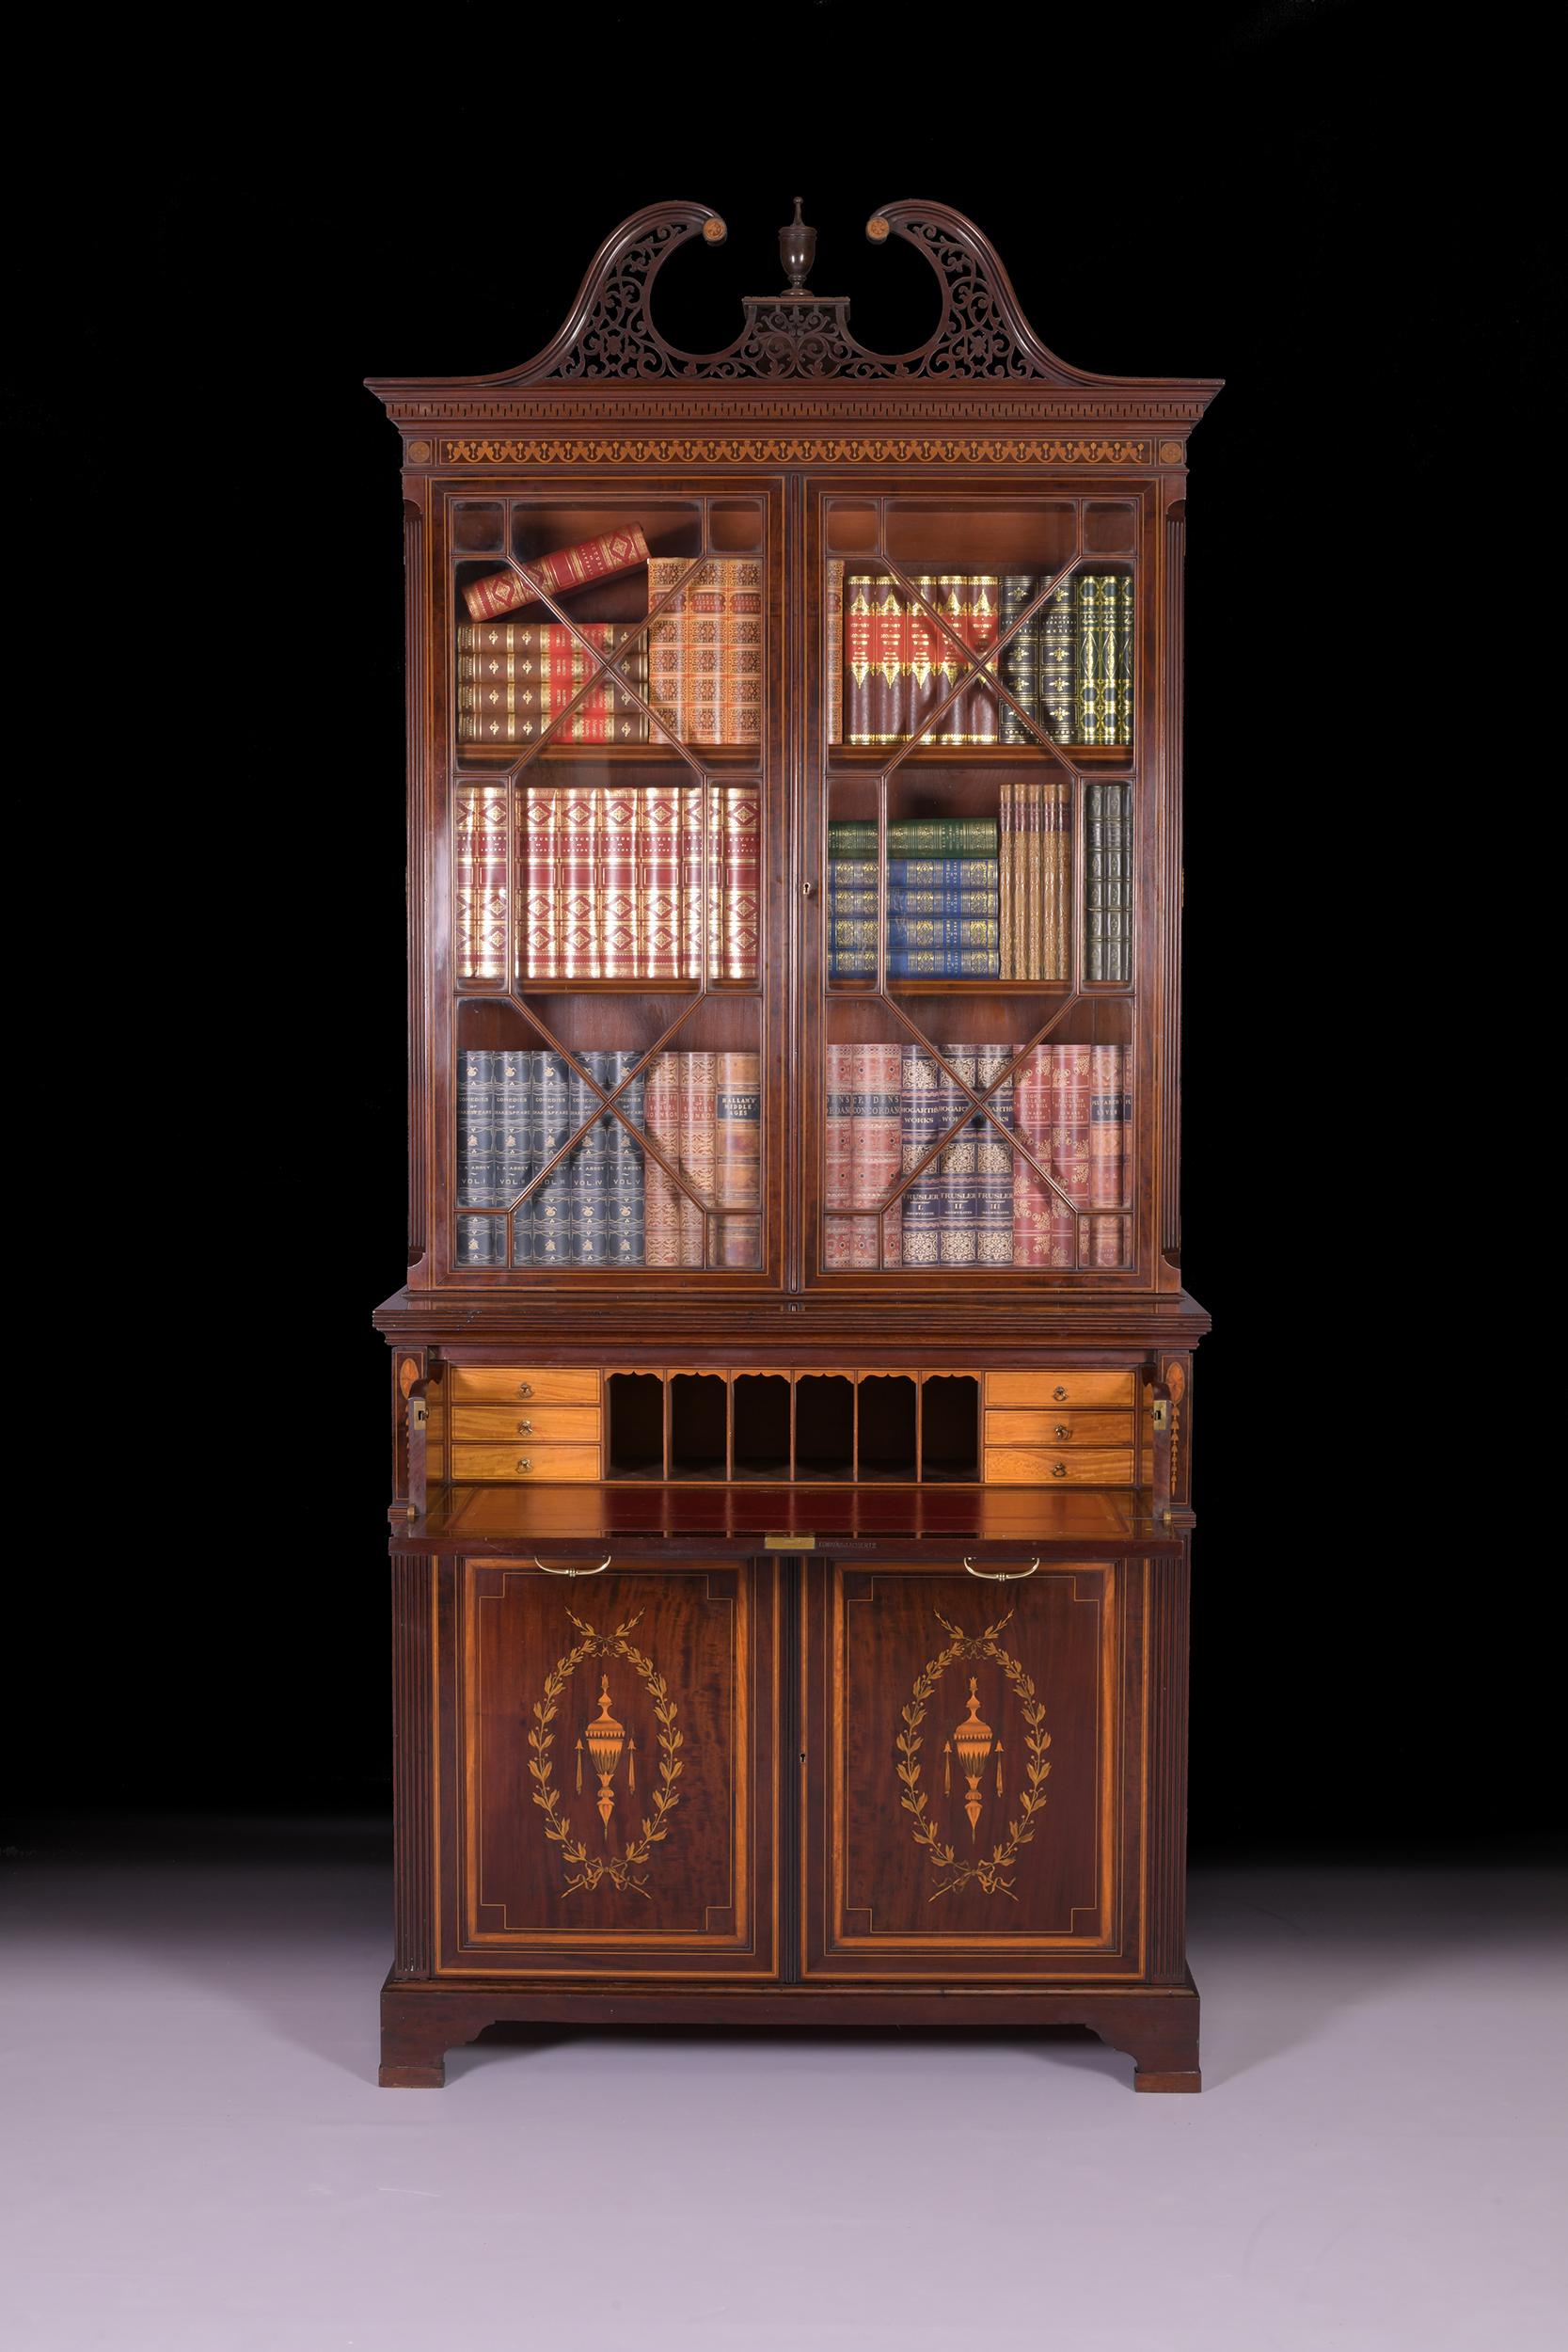 Edwardian Late 19th Century English Secretaire Bookcase by Edwards & Roberts For Sale